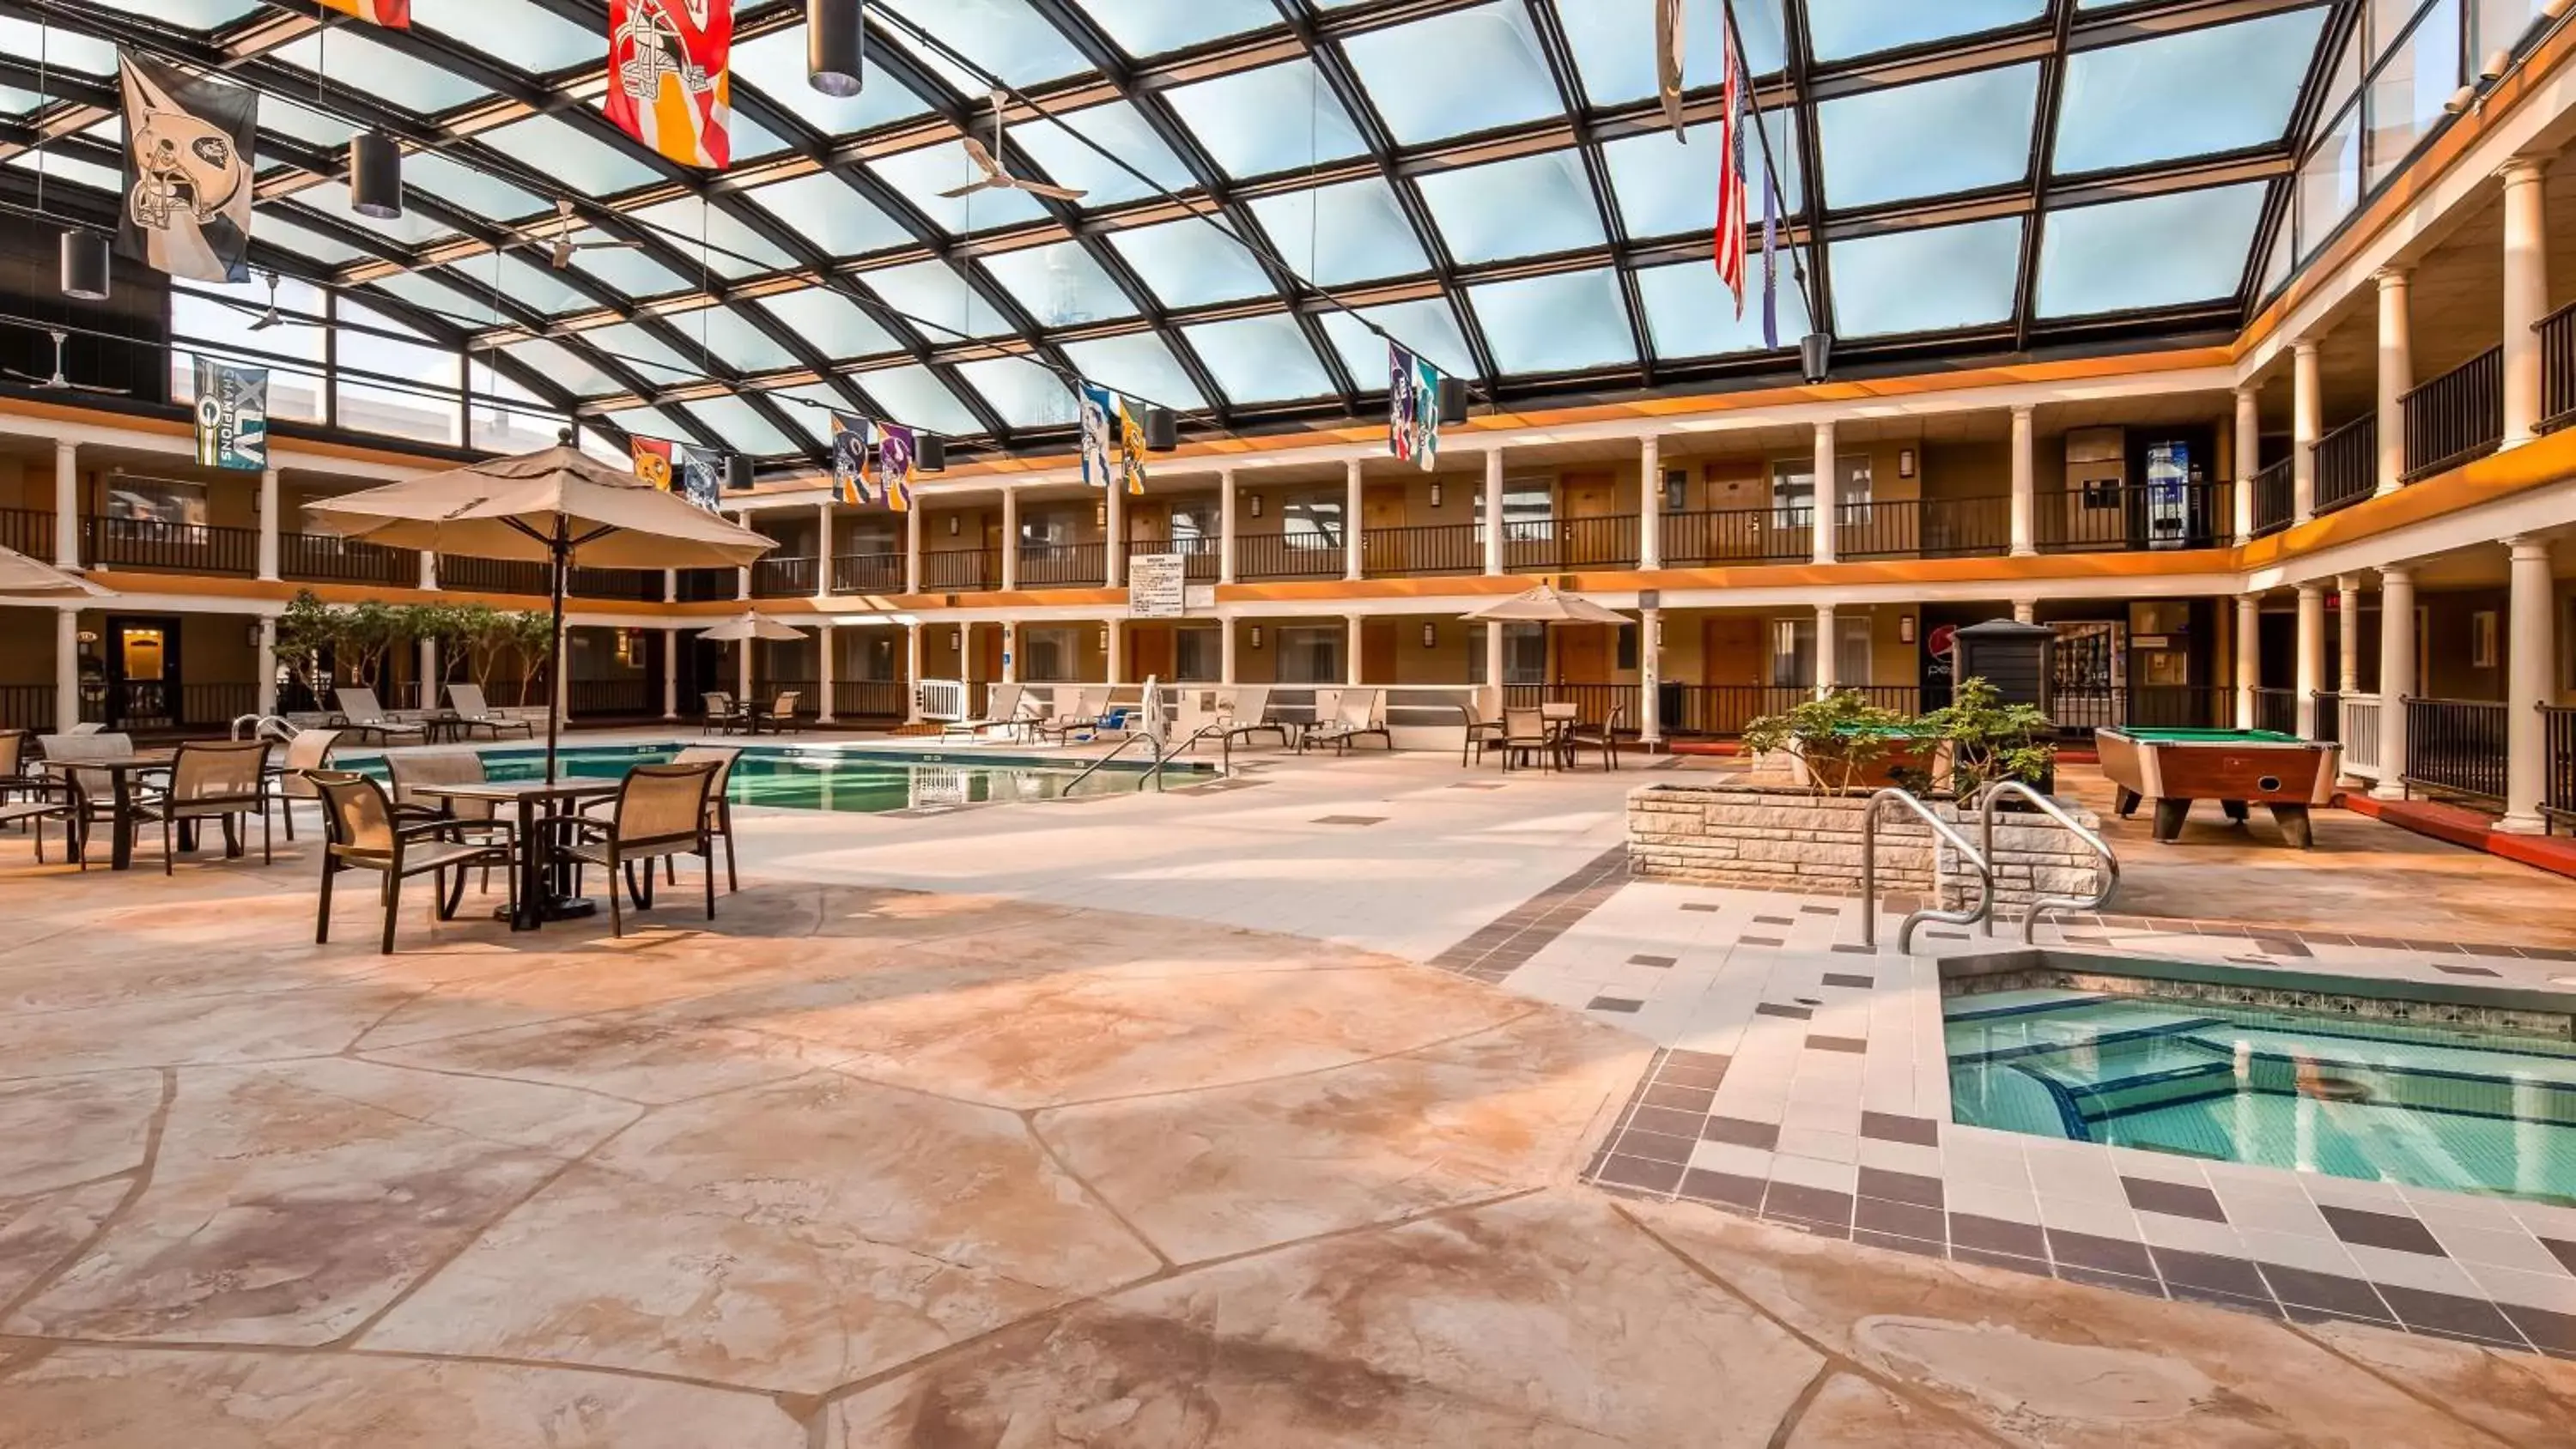 On site, Swimming Pool in Best Western Green Bay Inn and Conference Center